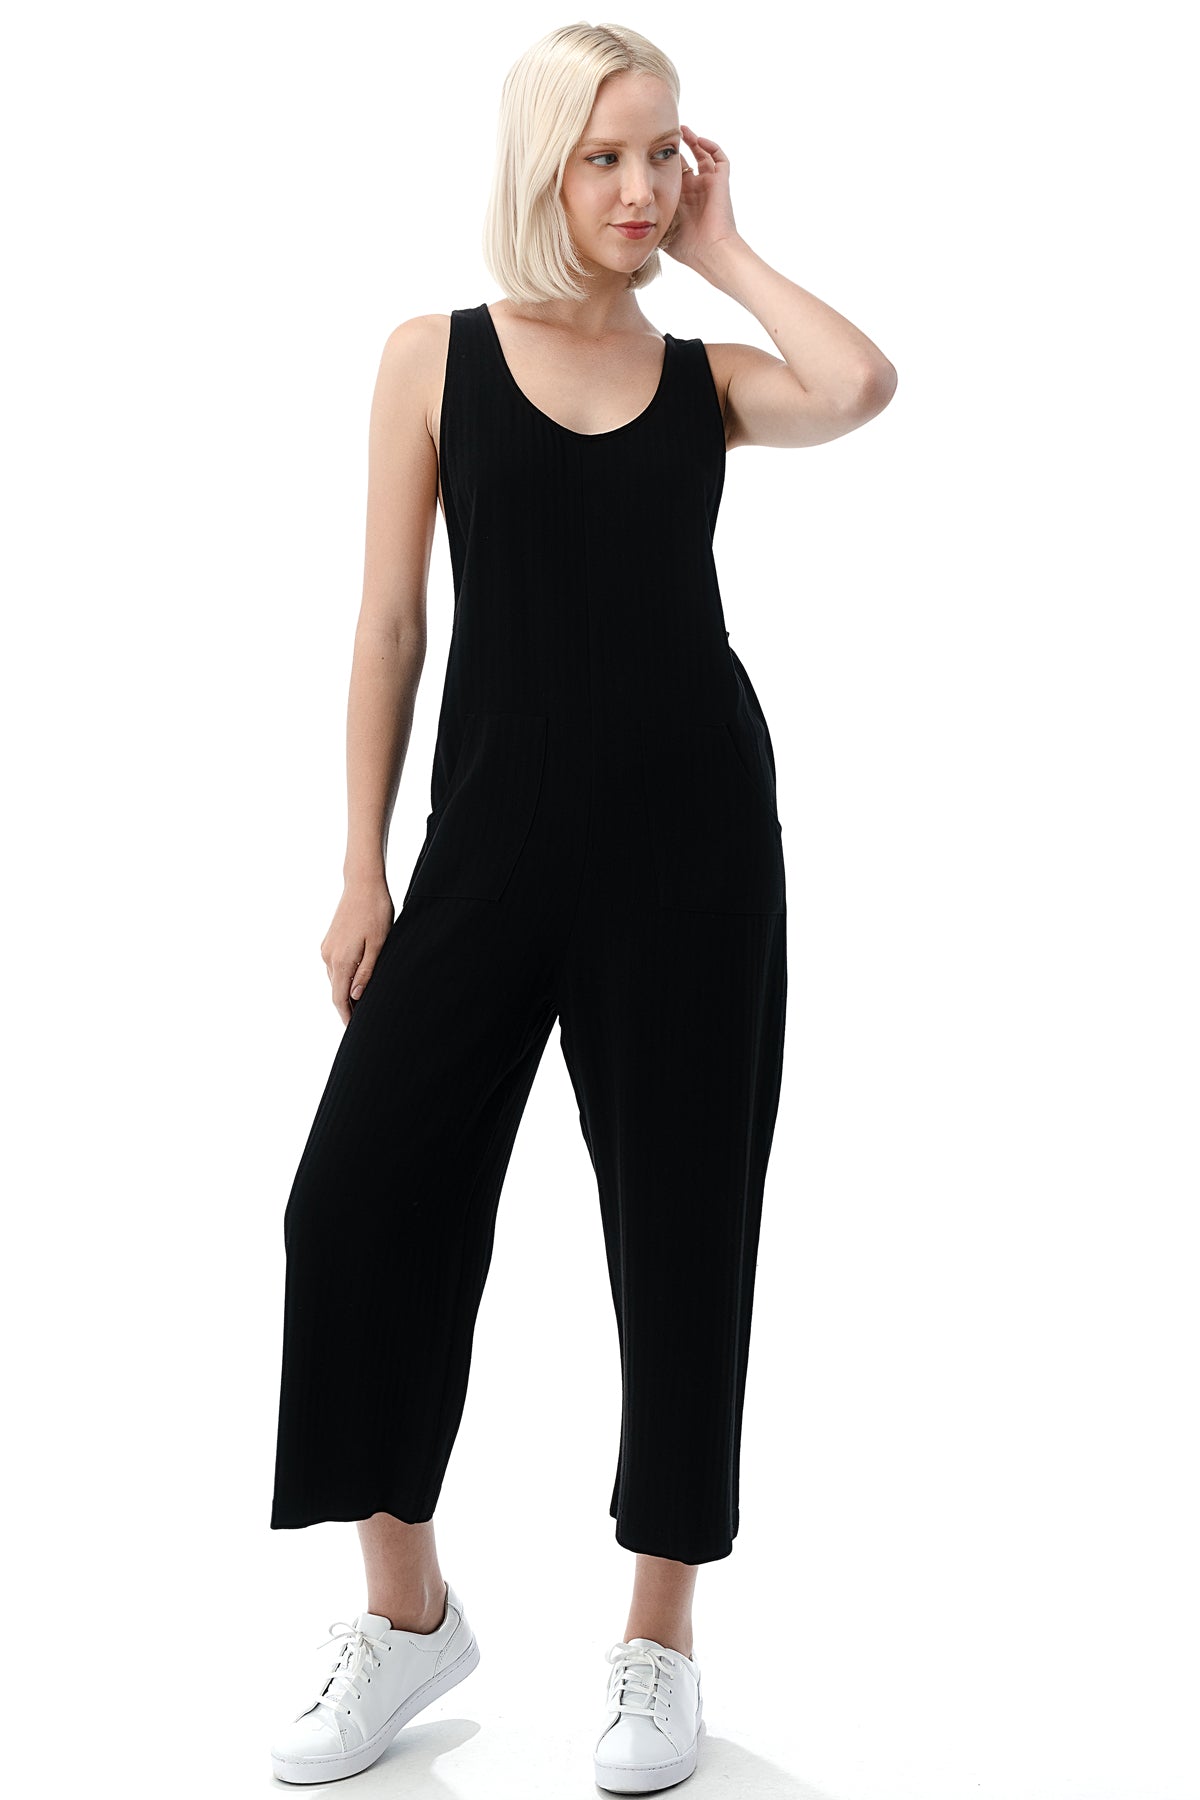 EDGY Land Girl's and Women's Scoop Neck Patch Pocket ZiPPEr Up Tank Wide Leg Jumpsuit